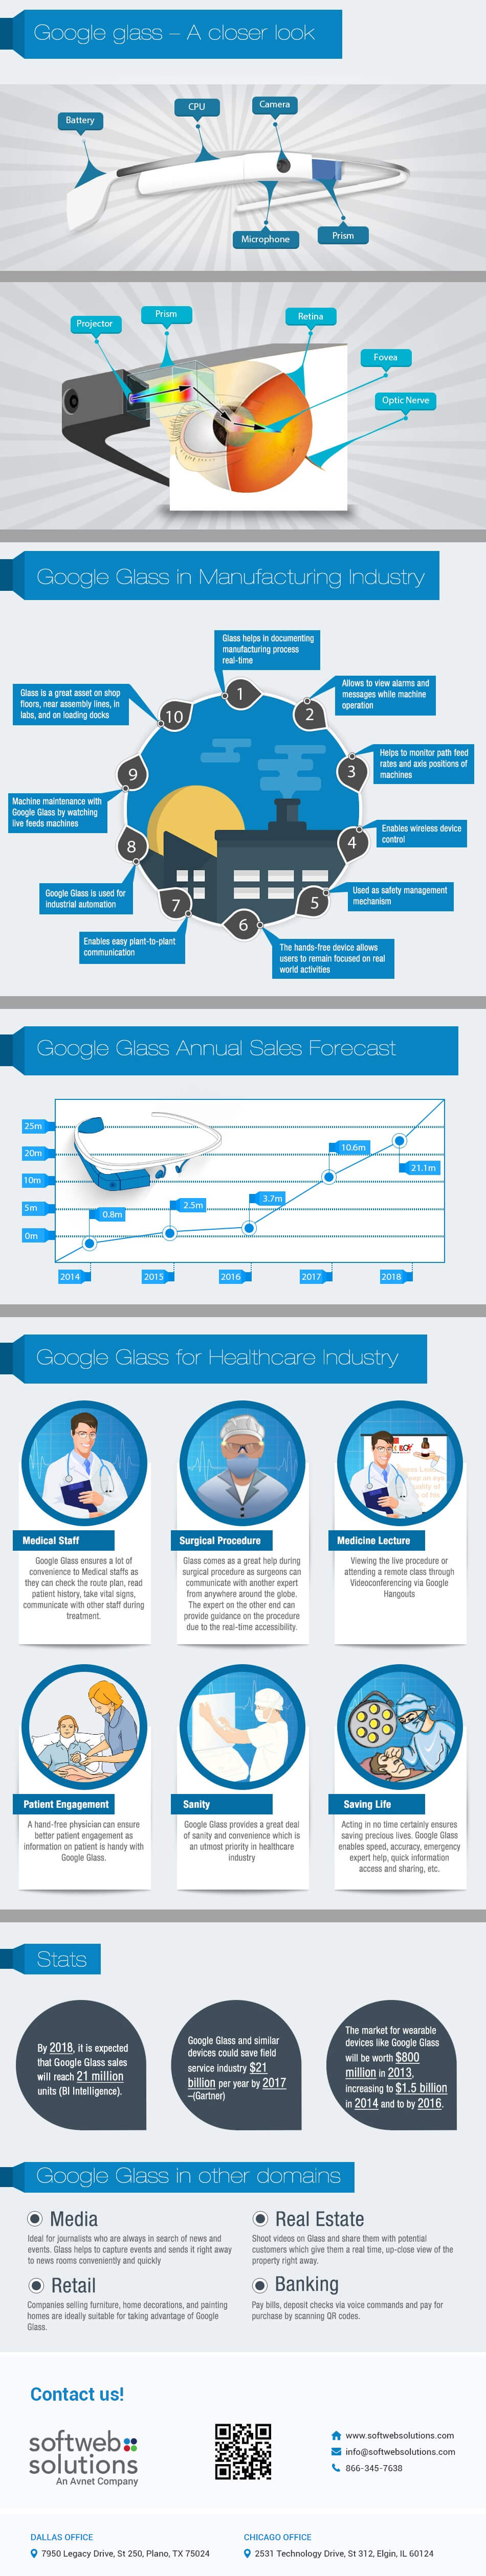 Google Glass in various industry